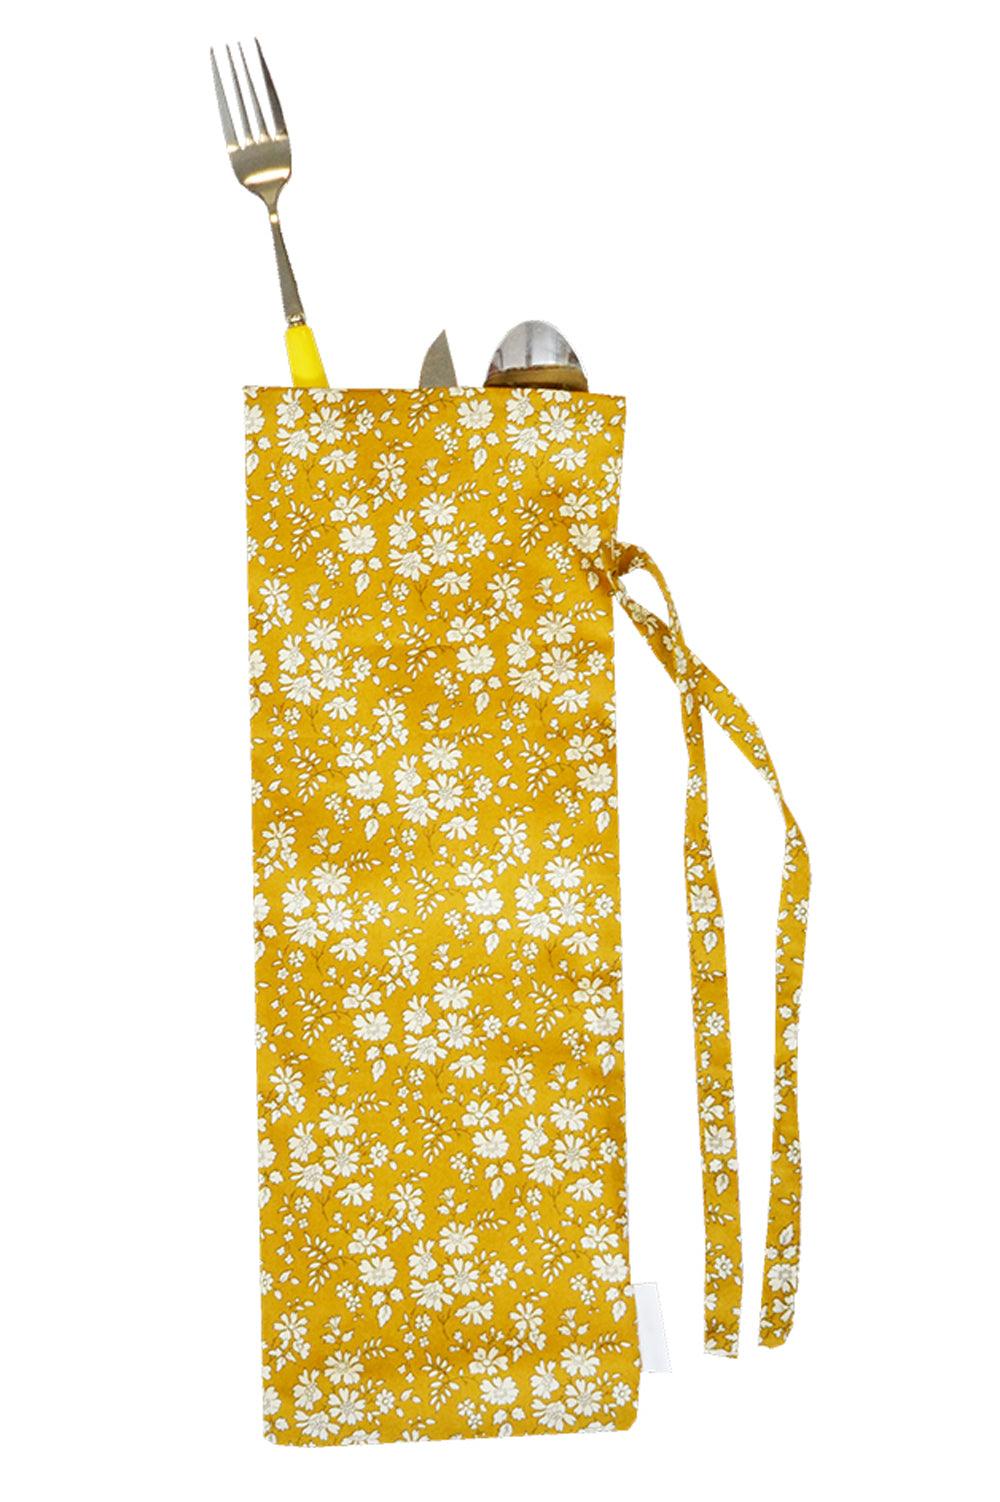 Cutlery Bag made with Liberty Fabric CAPEL MUSTARD - Coco & Wolf